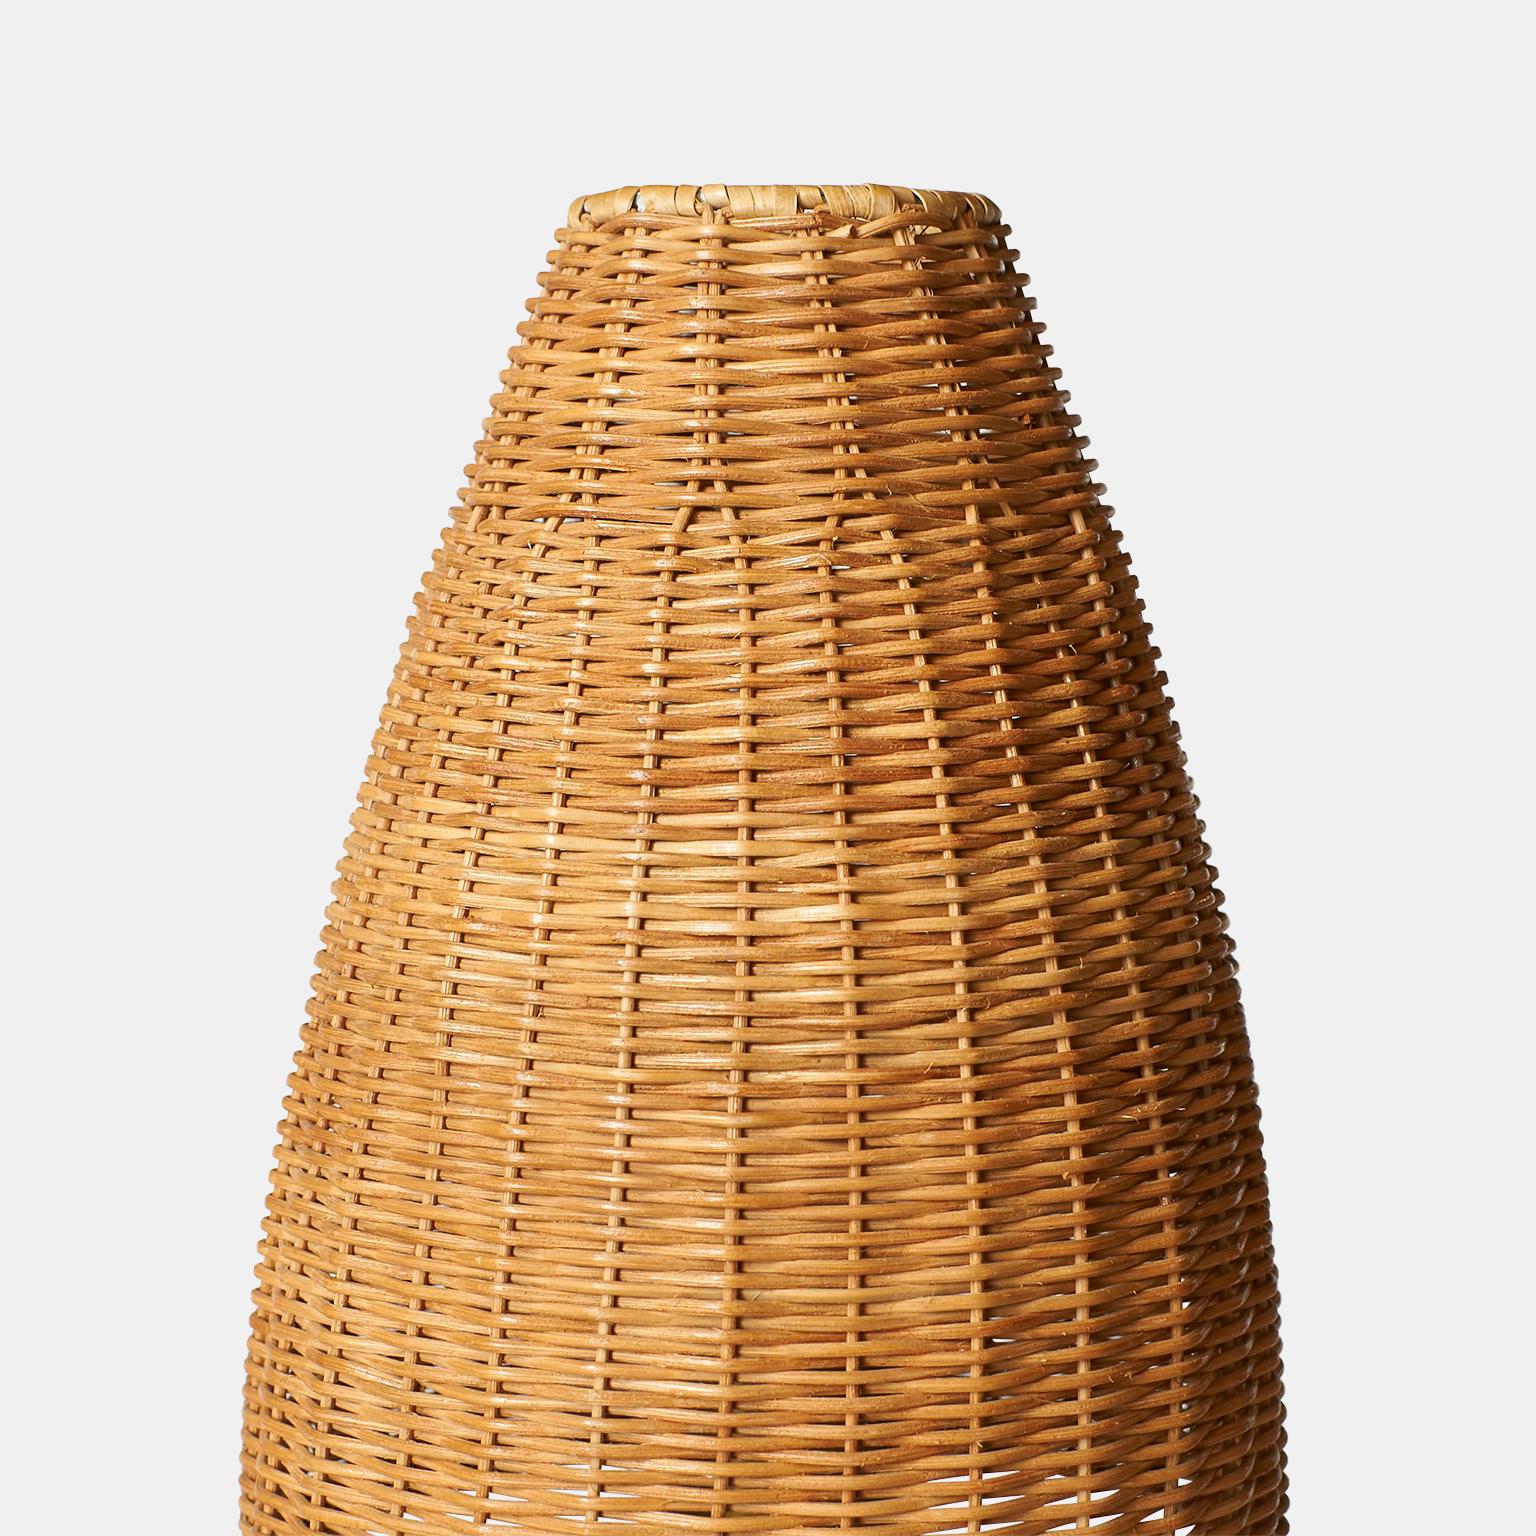 A brass coated pewter lamp by Josef Frank for Svenskt Tenn. Model #2332. Conical wicker shade of later vintage. Two available. Only one shade.  

